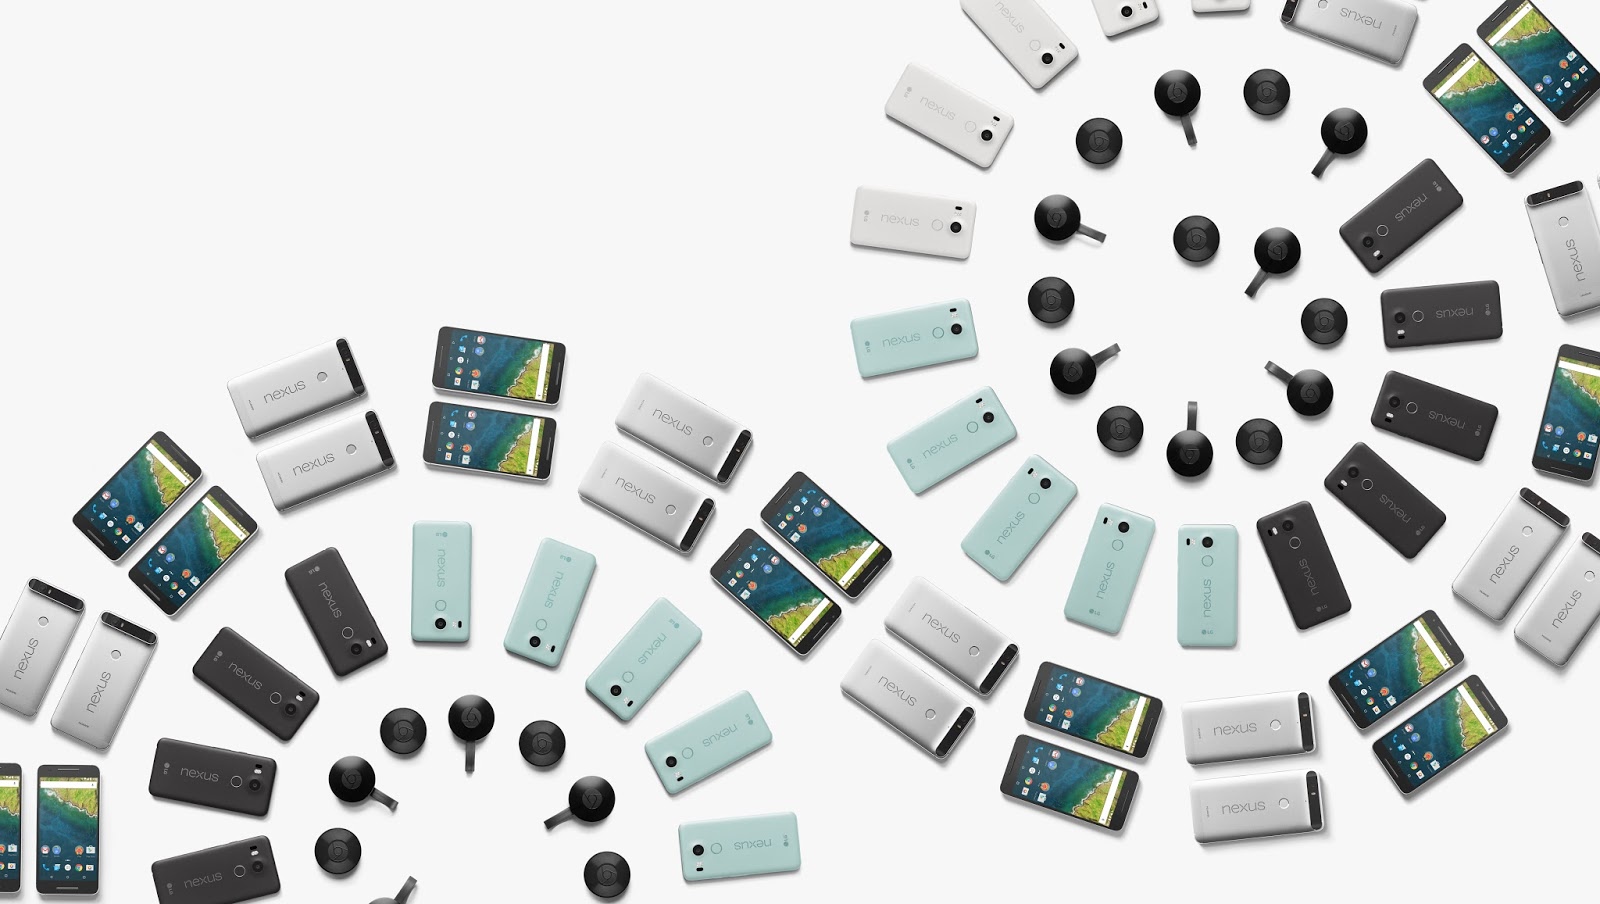 With Nexus and Chromecast, Google has built a product empire